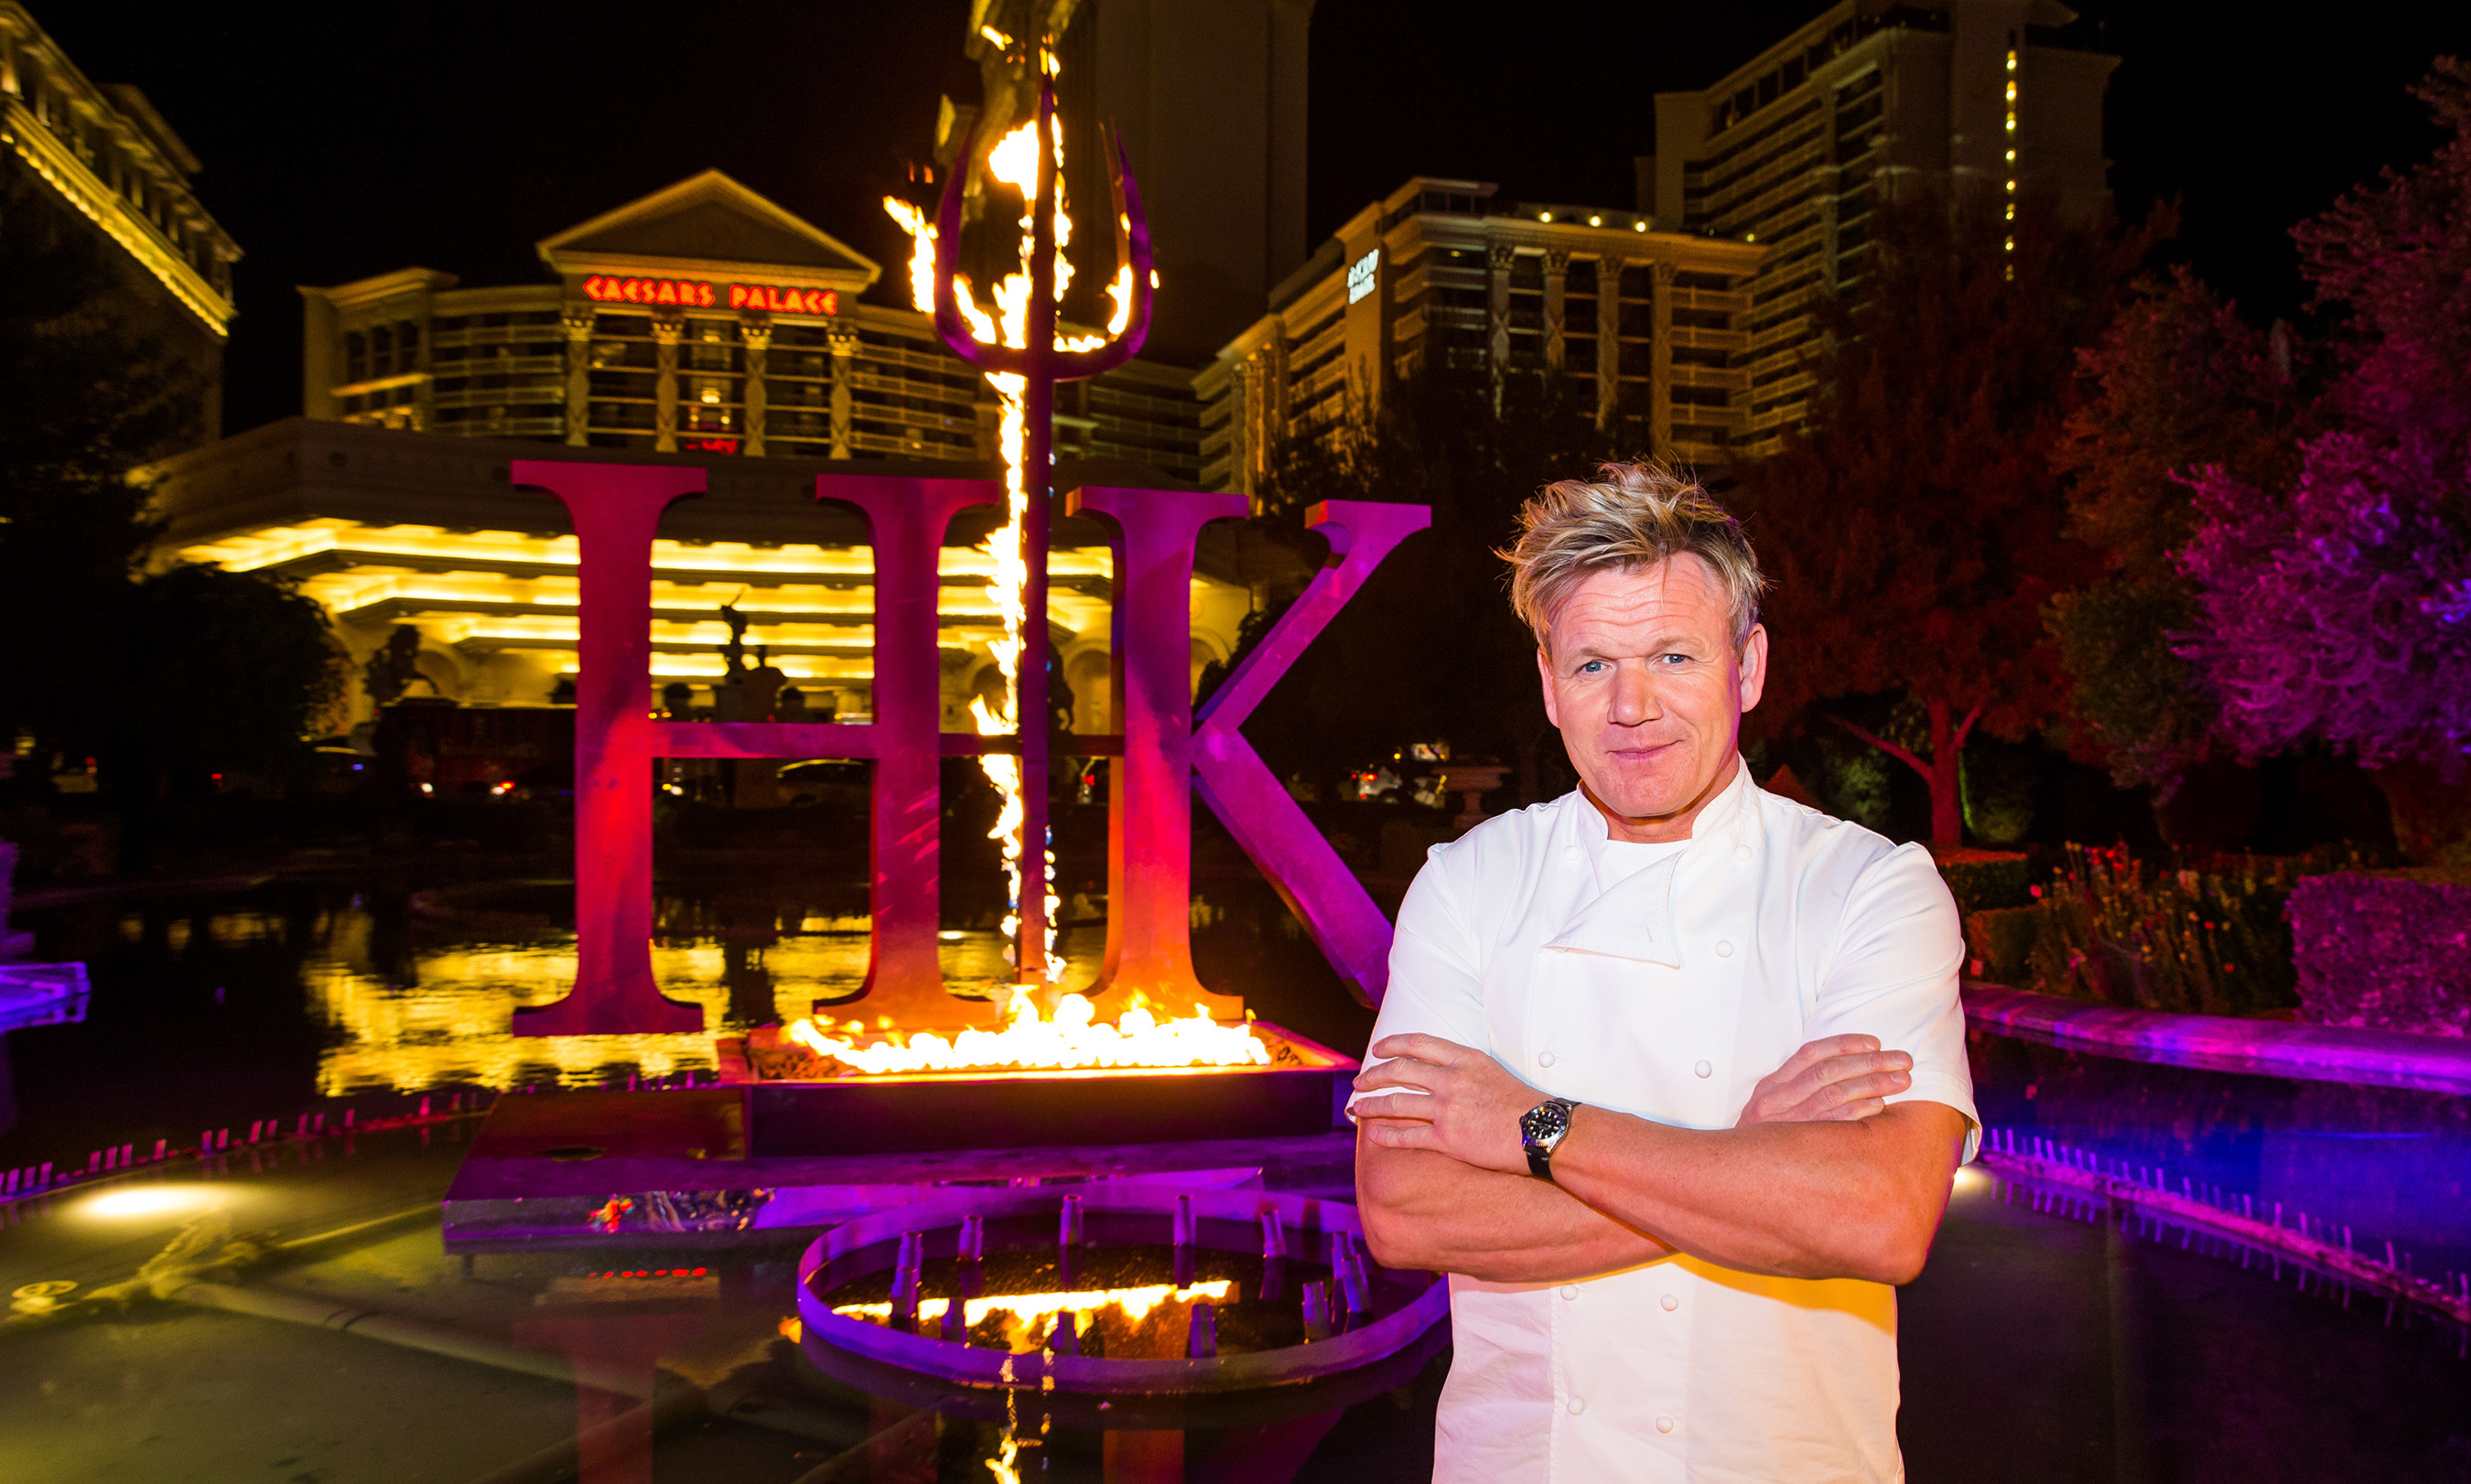 Chef Gordon Ramsay poses with series’ signature pitchfork in front of the iconic fountains at Caesars Palace Las Vegas announcing the upcoming winter debut of Gordon Ramsay Hell’s Kitchen restaurant.